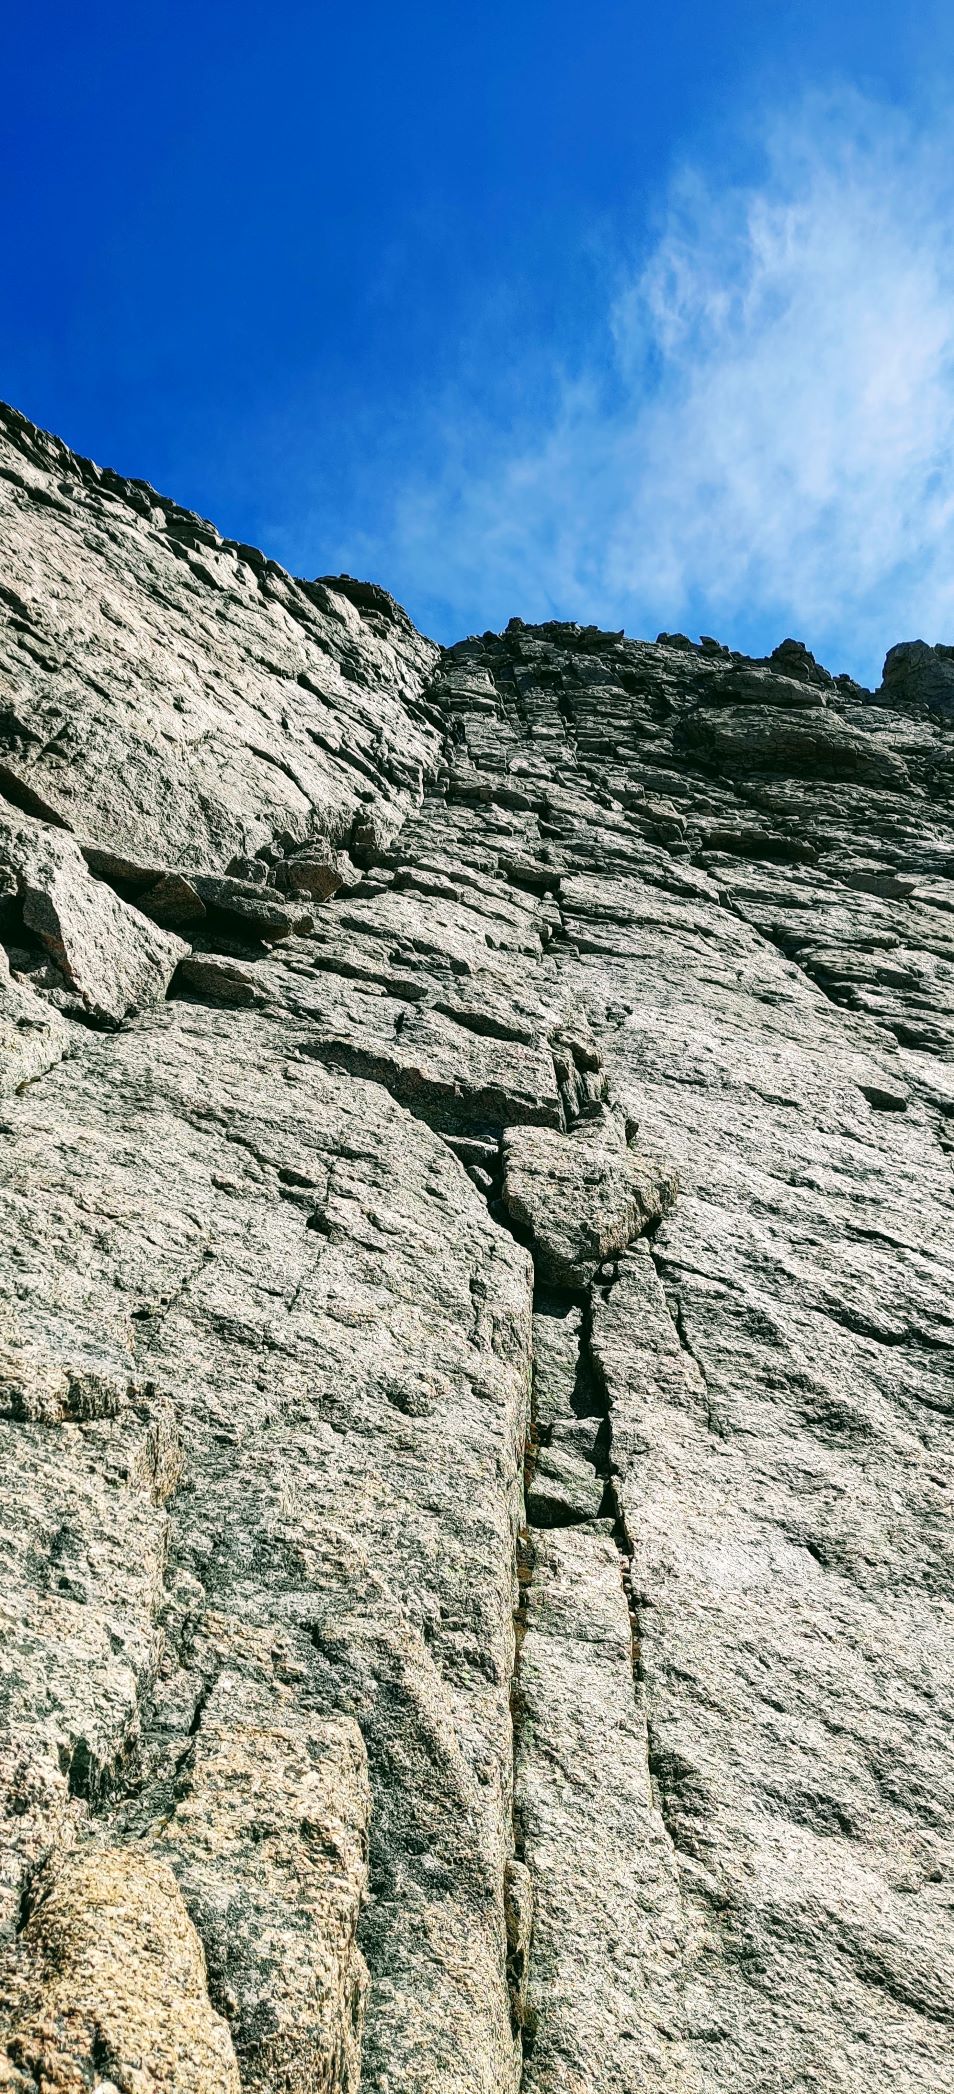 A close-up of a rock wall leading to the summit of Longs Peak